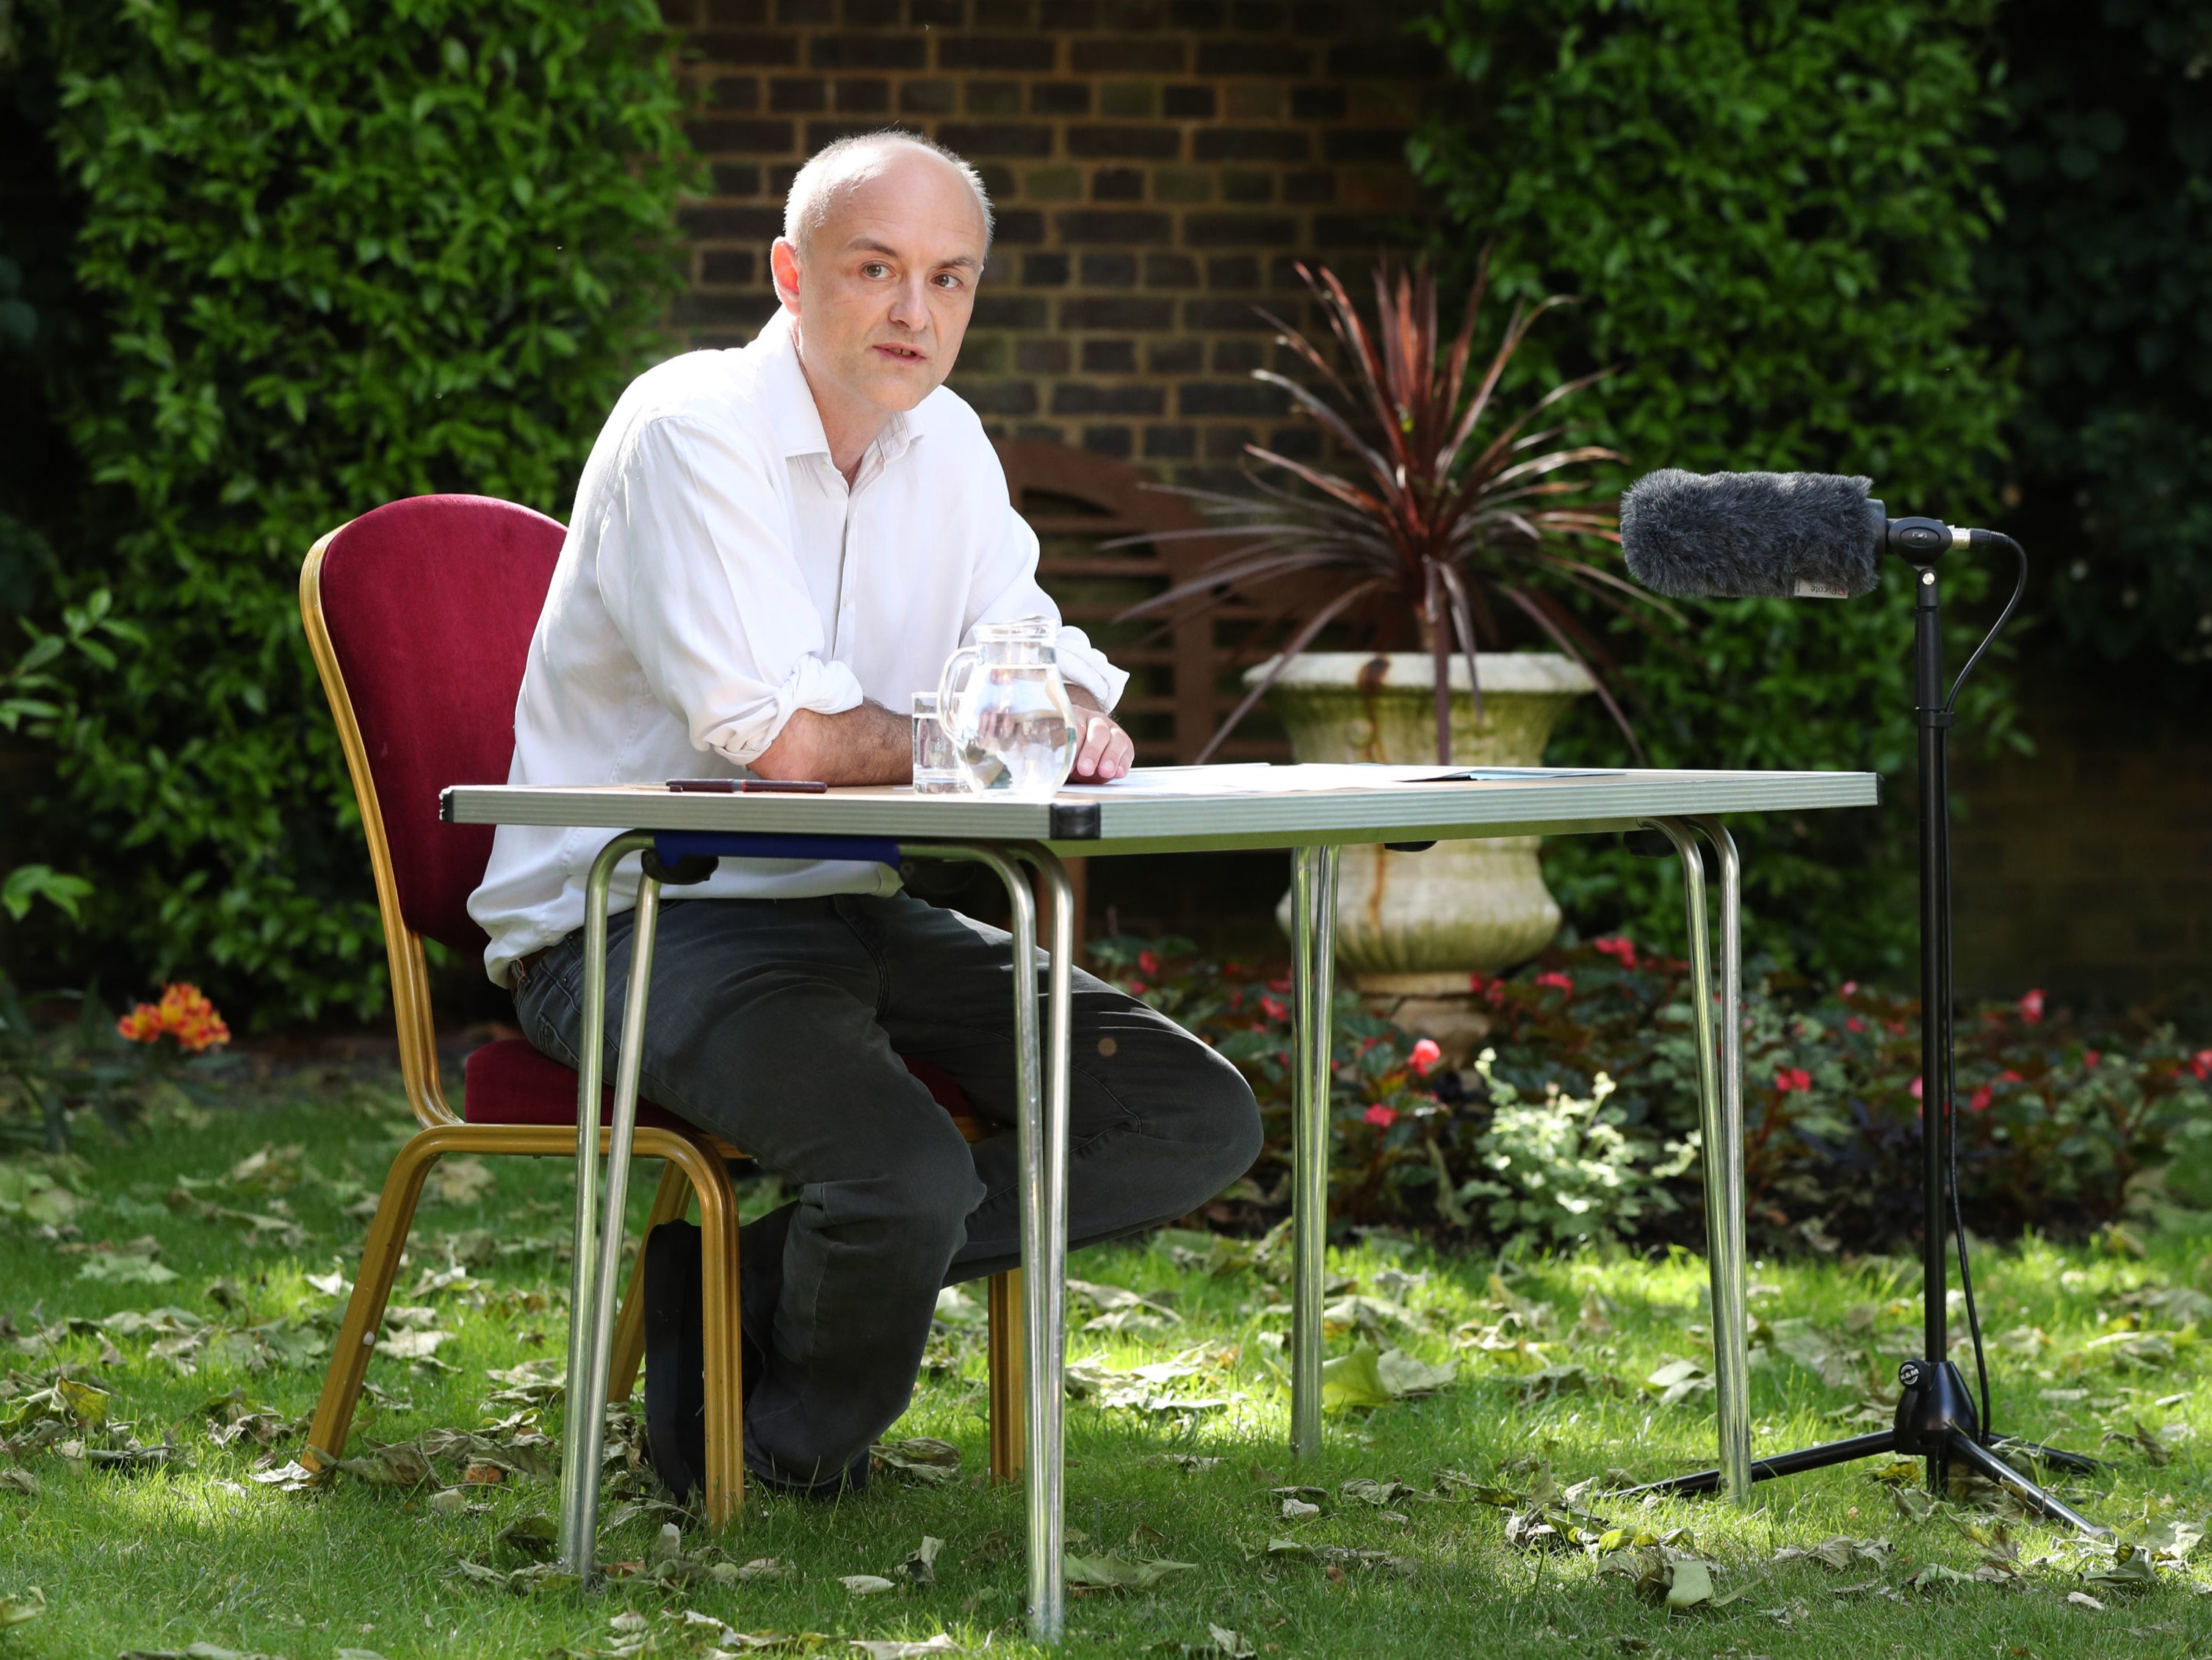 Dominic Cummings gave a news conference in the garden to explain his trip to Barnard Castle